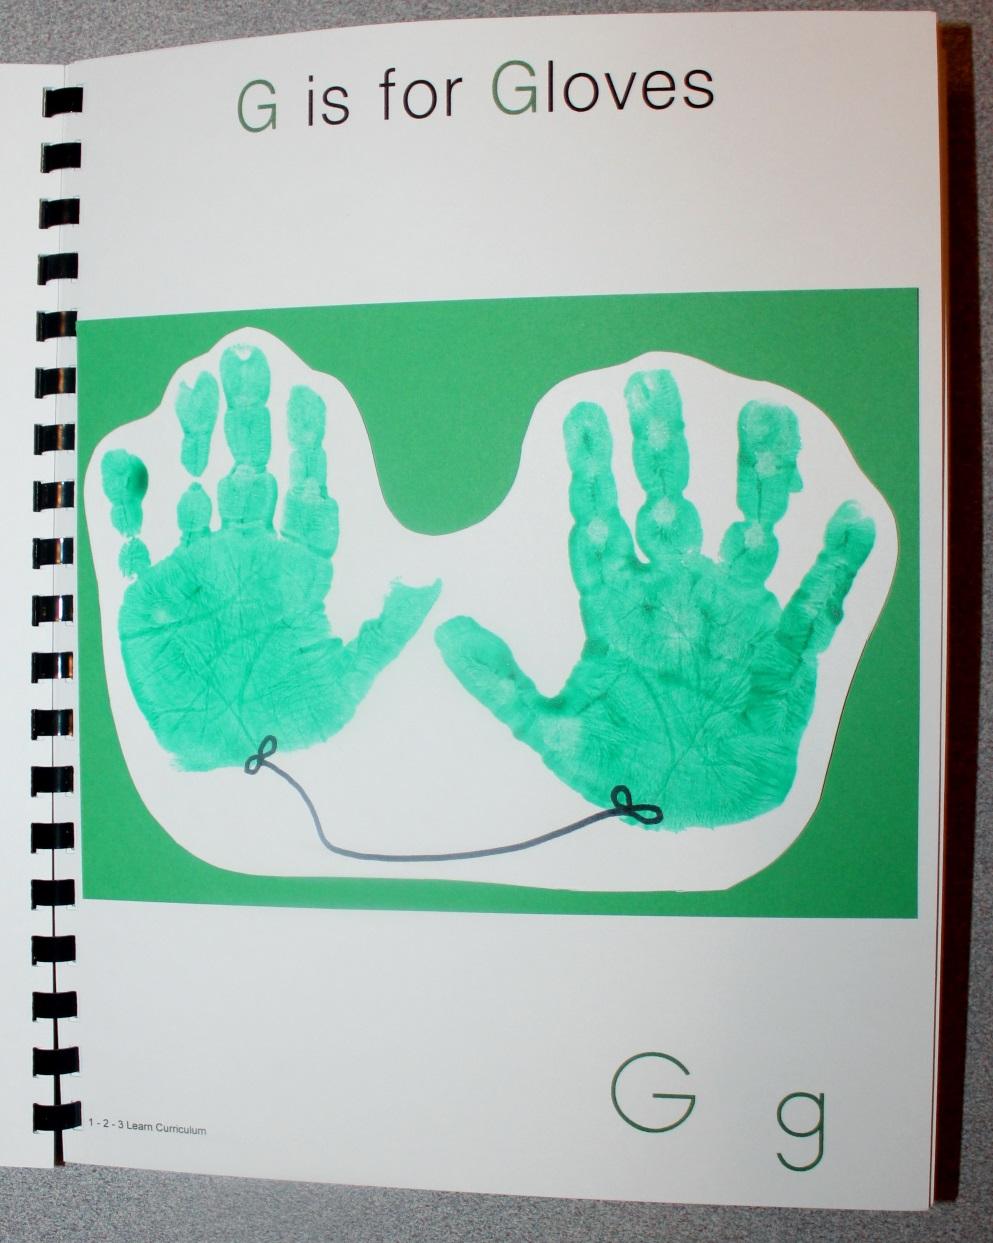 G is for Gloves For this activity you will need to paint both hands of the child. Let them pick out the color they would like their gloves to be.